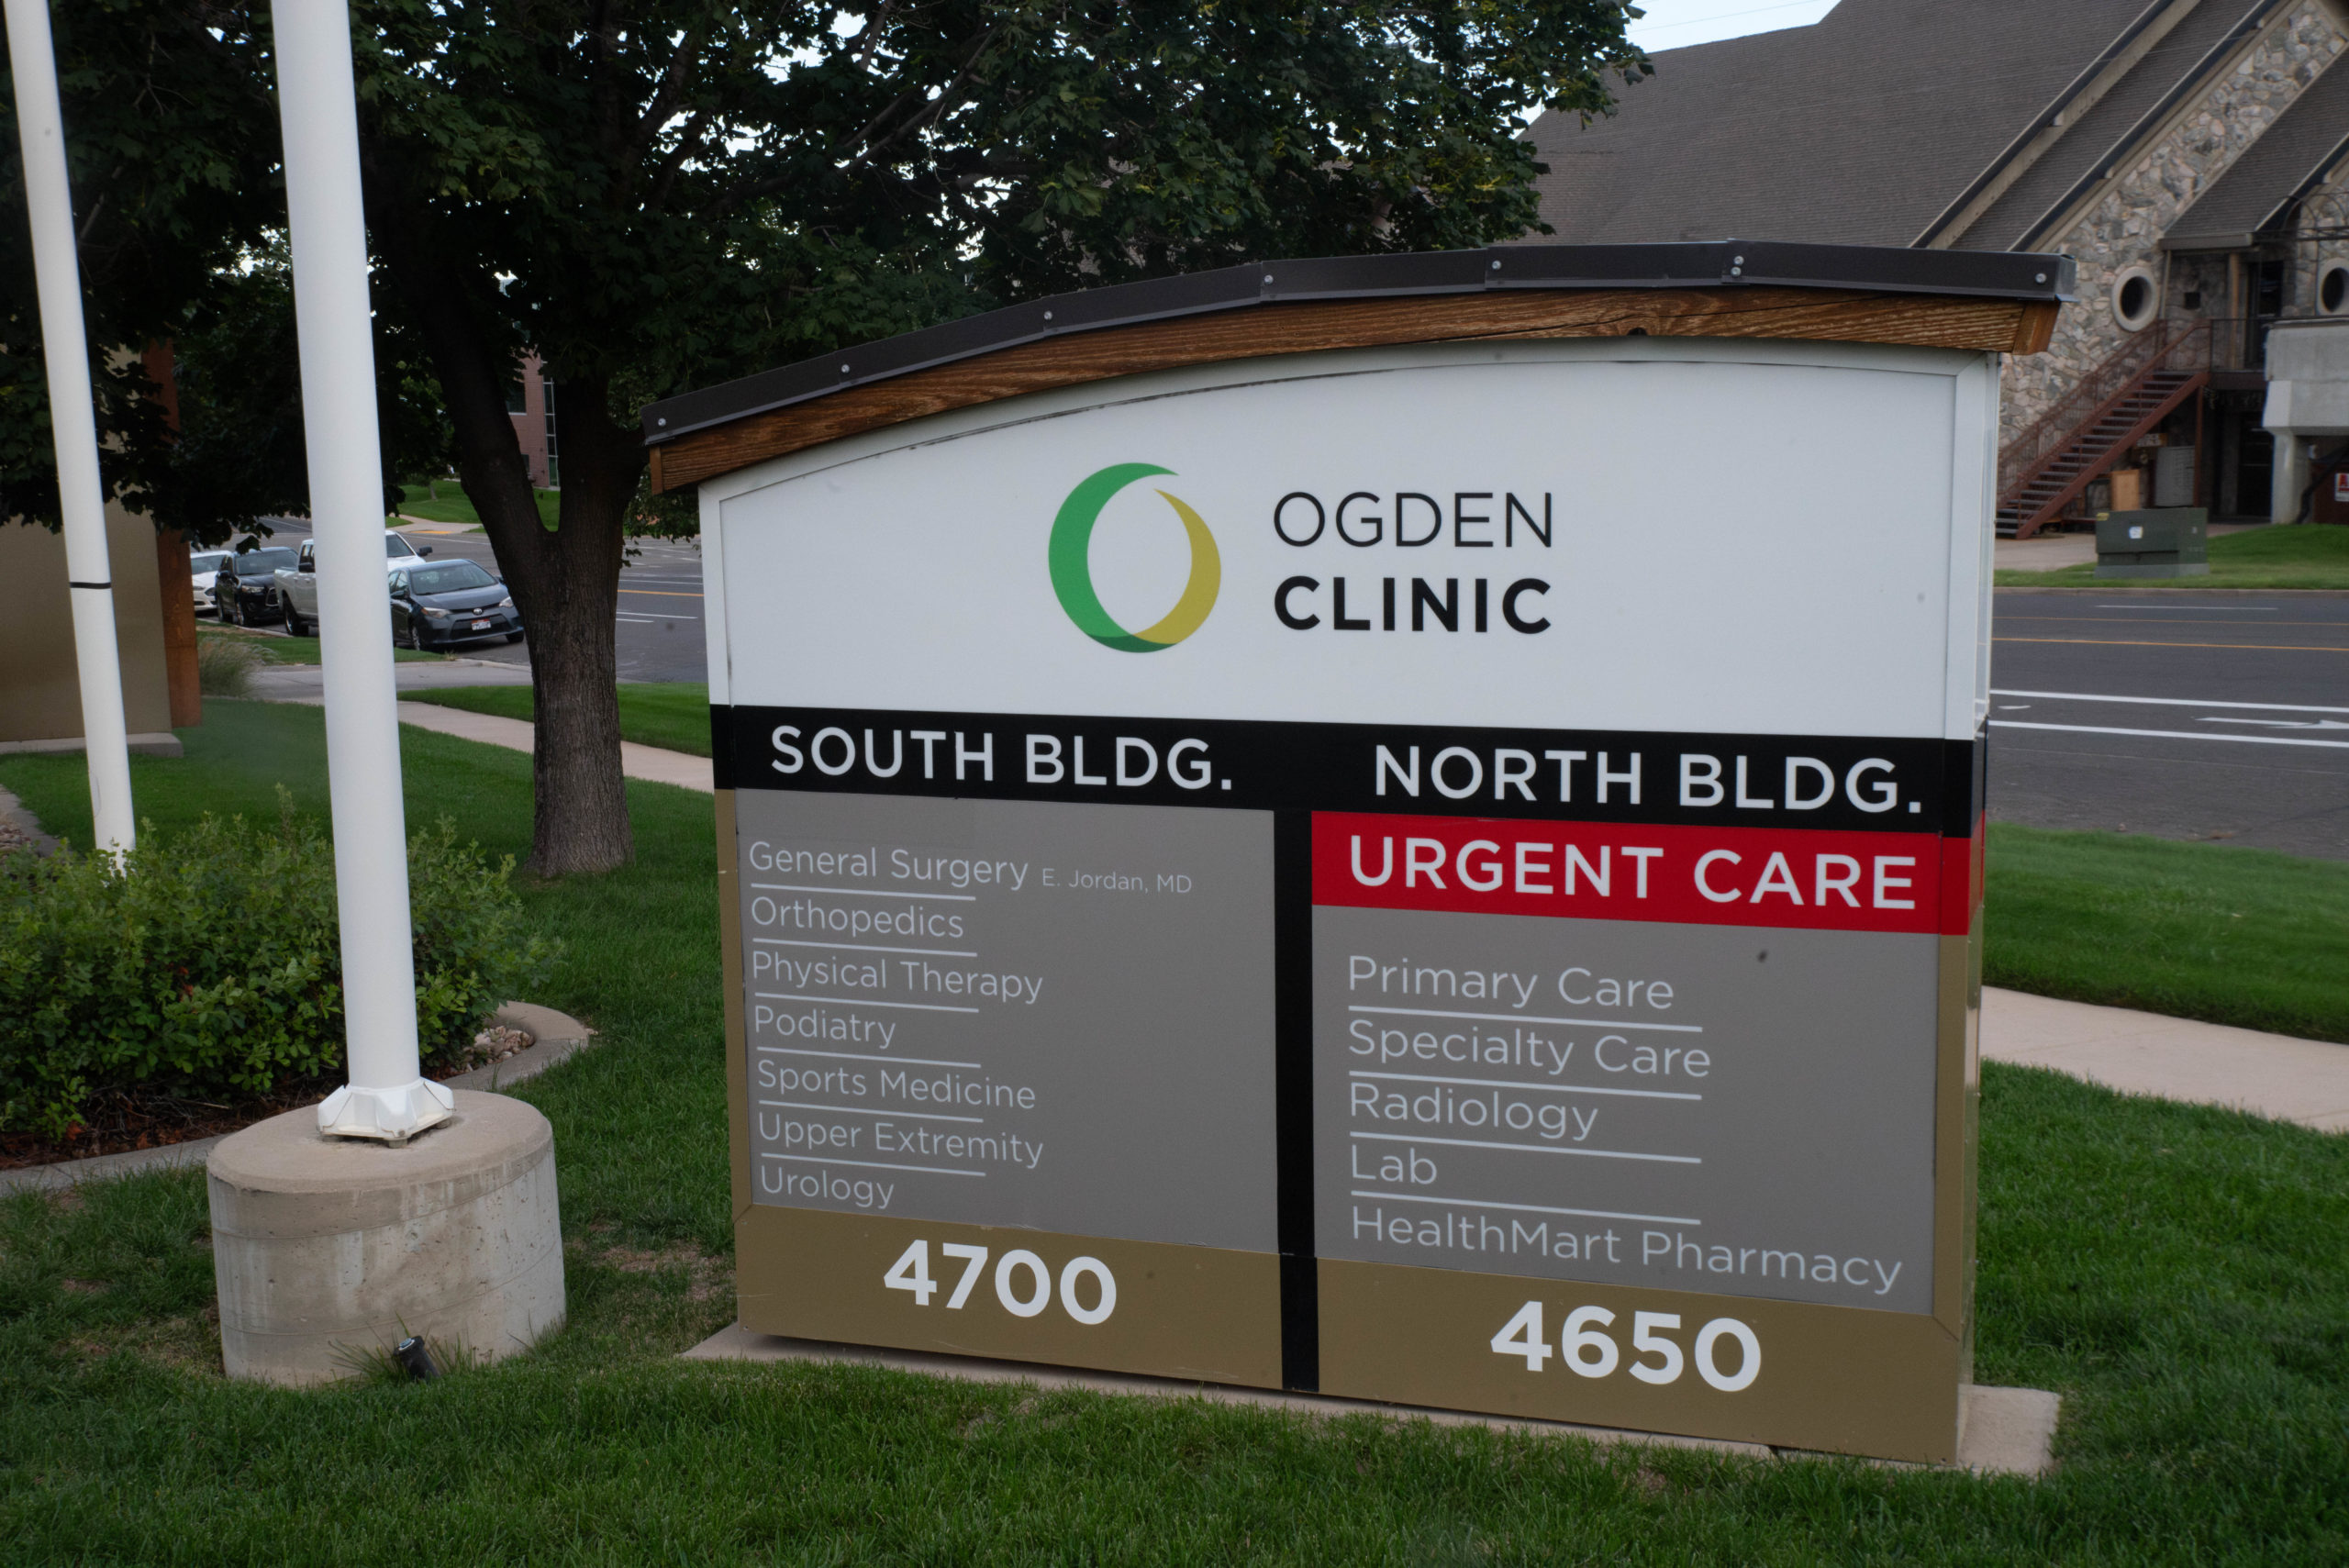 The Ogden Clinic sign outside the building.